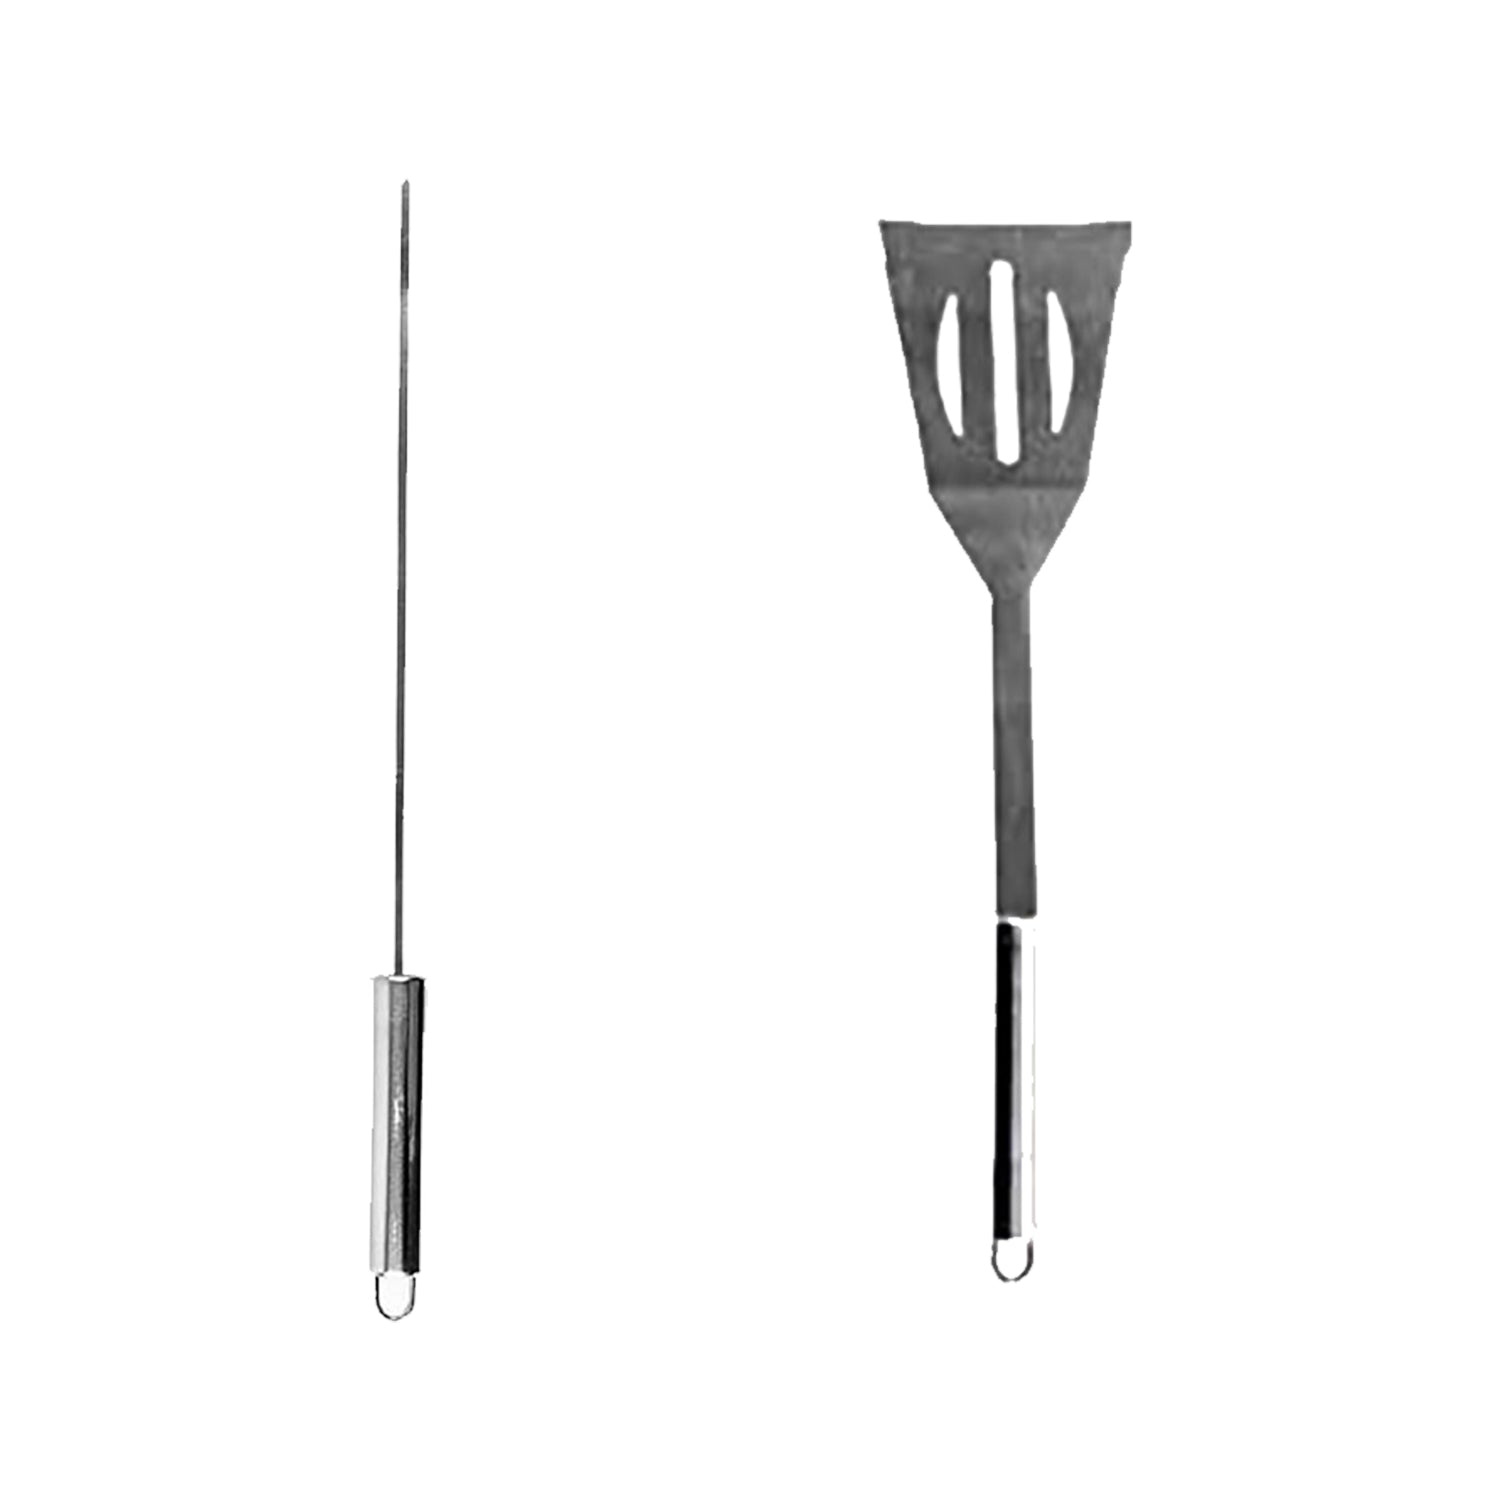 Barbeque Grill Kit Small, Set of 2 | Barbeque Accessories